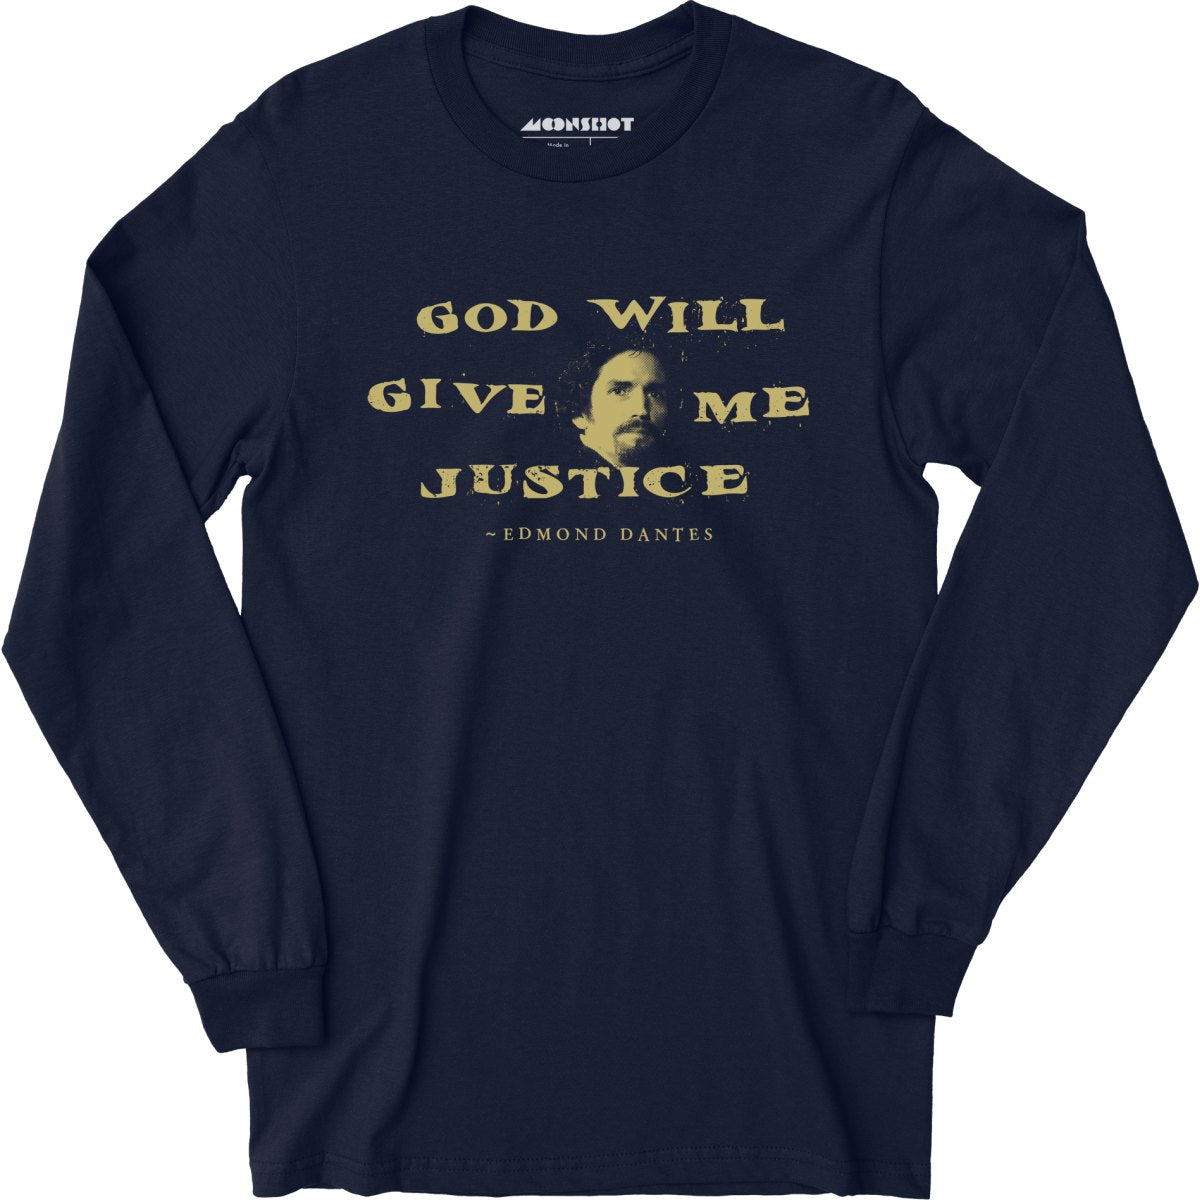 Edmond Dantes - God Will Give Me Justice - Long Sleeve T-Shirt